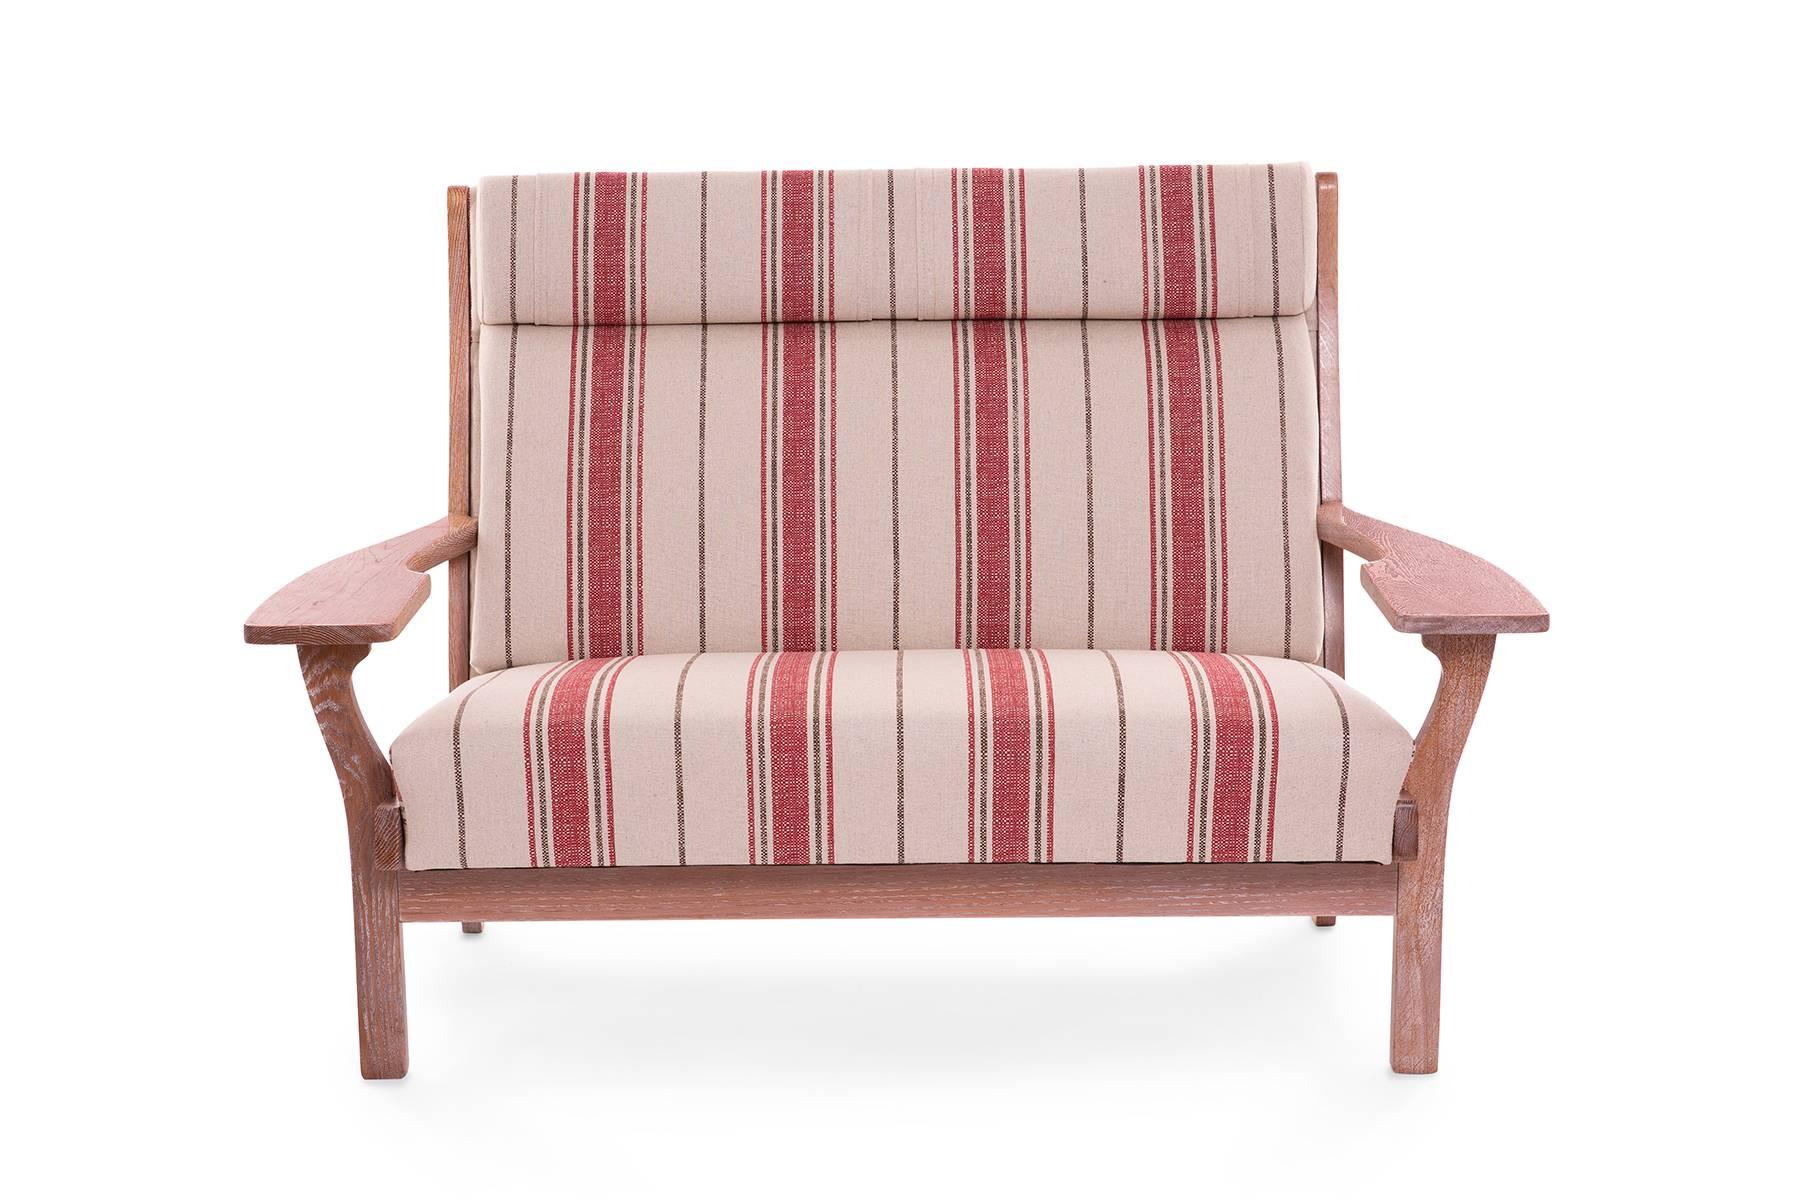 Hans J. Wegner for Getama sofa, circa early 1960s. This example has a solid oak frame that has been newly cerused. The sofa has been newly upholstered in a striped red fabric as well.